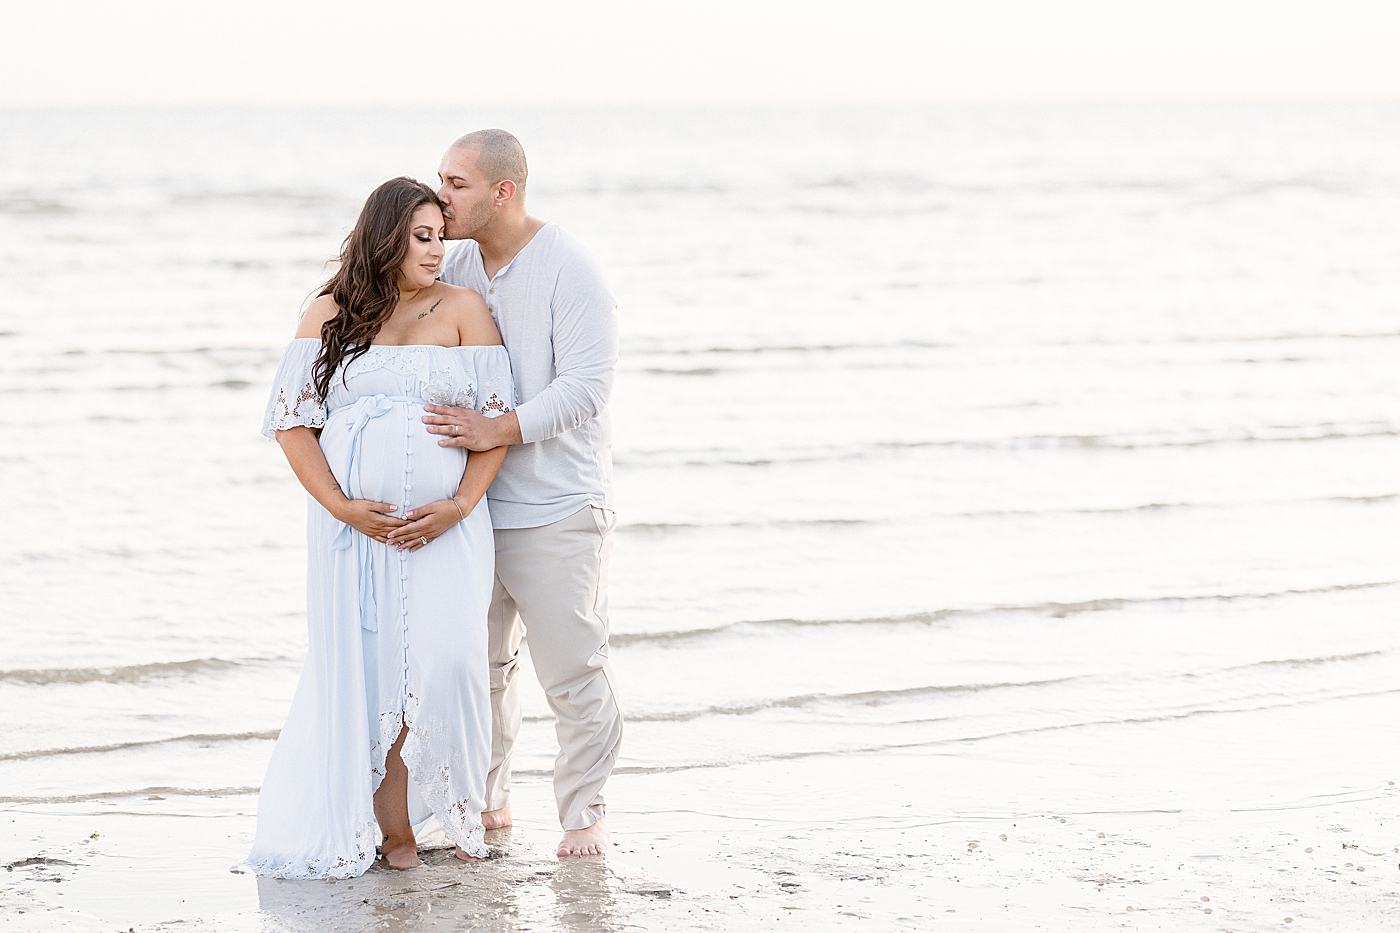 Sunset maternity session at the beach in Tampa, FL. Photo by Brittany Elise Photography.